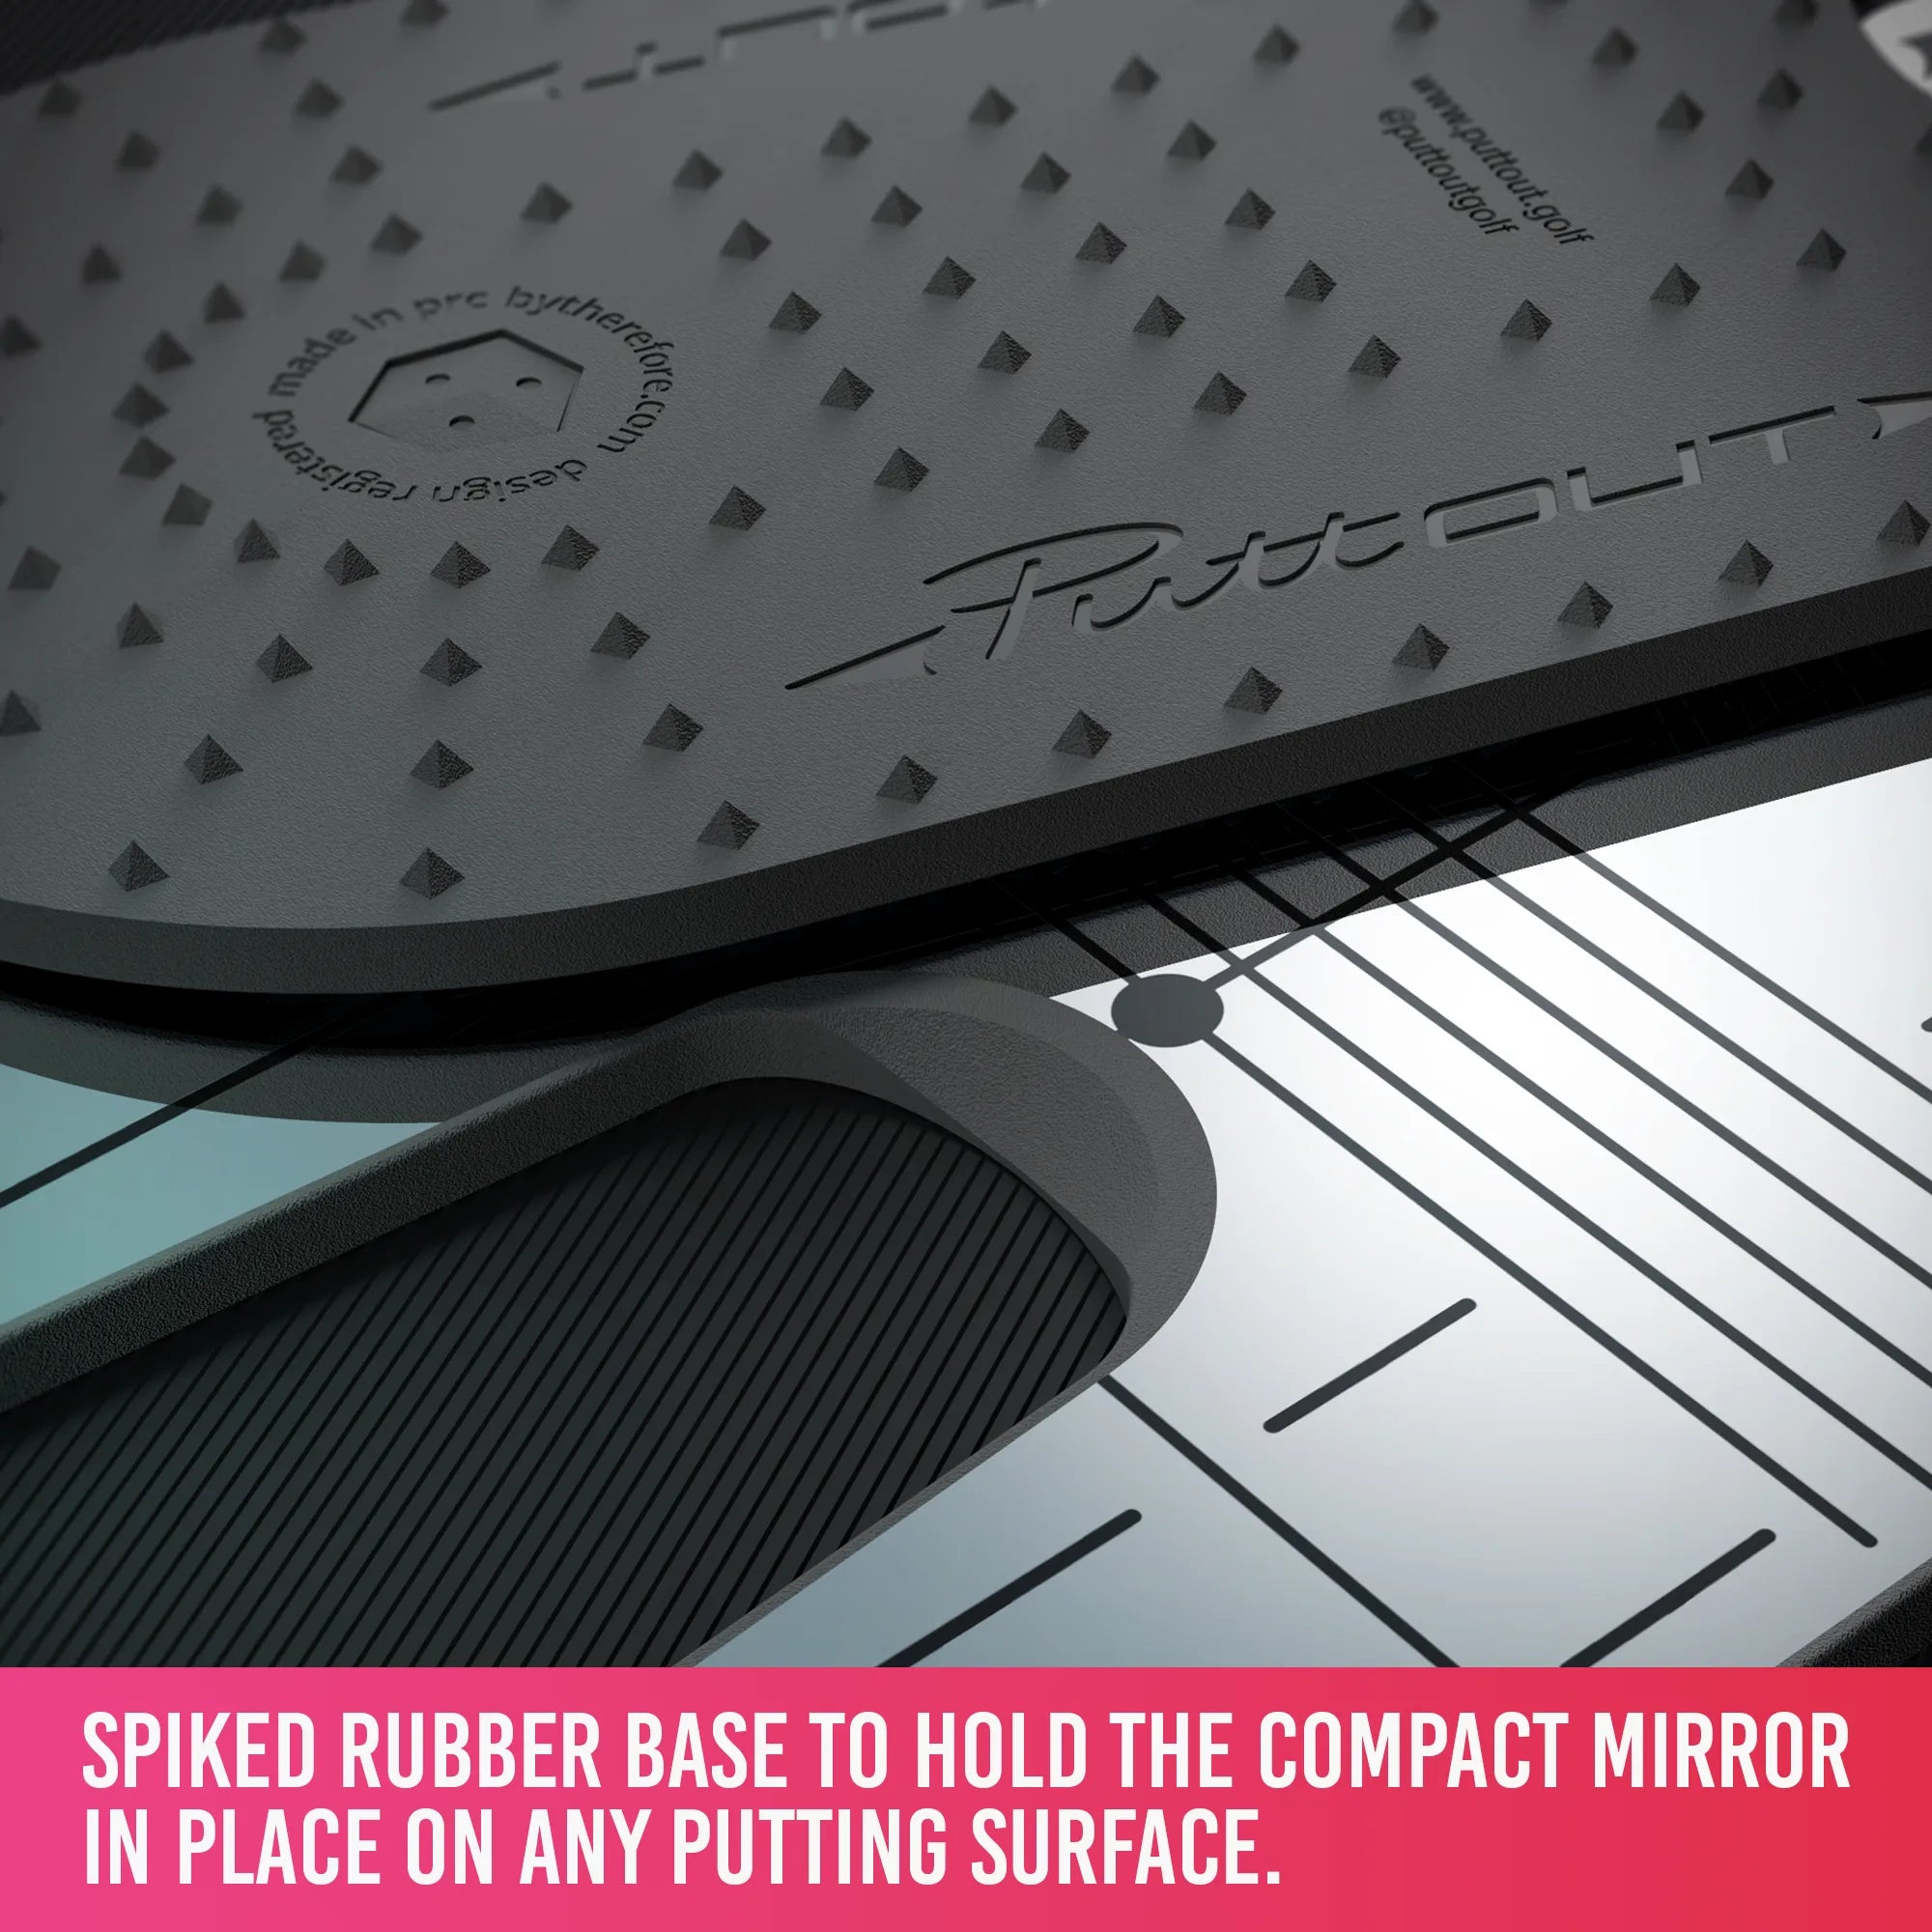 Compact Putting Mirror